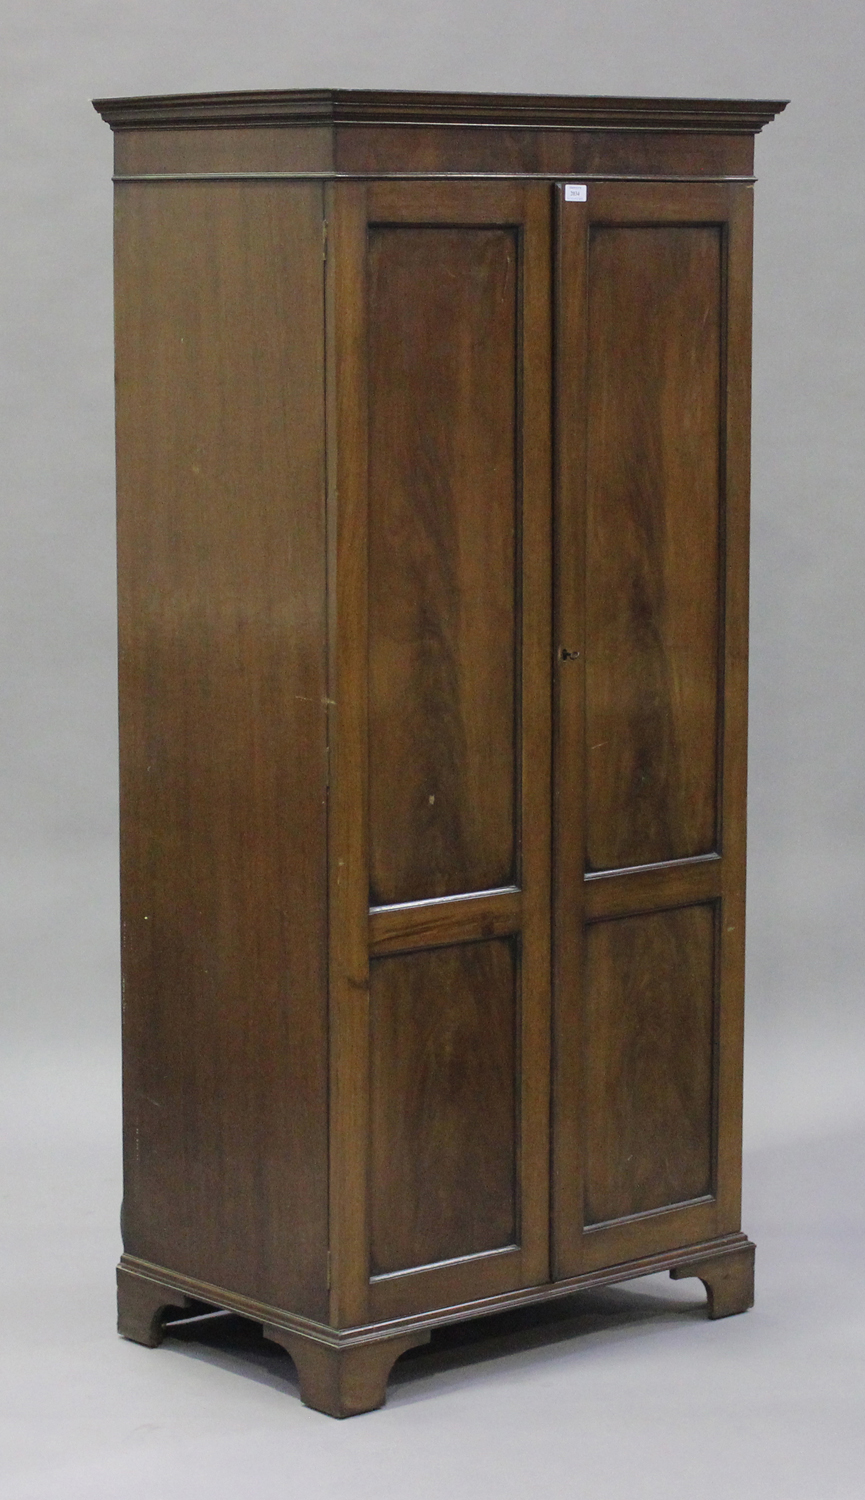 A 20th century Victorian style figured mahogany gentleman's two-door wardrobe, retailed by